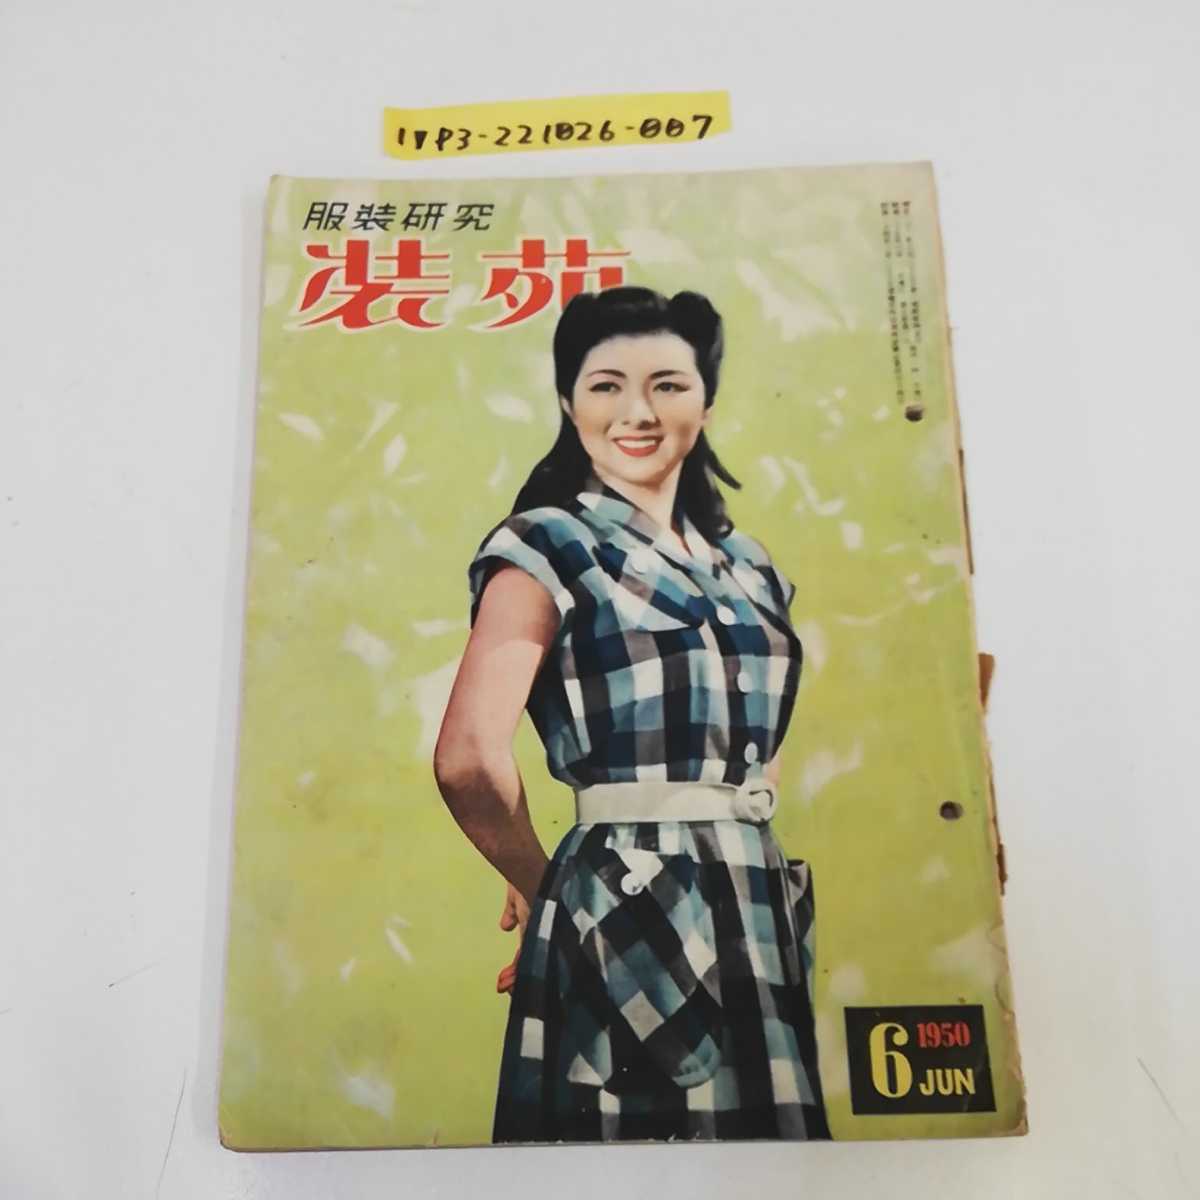 1_V clothes equipment research equipment .1950 year Showa era 25 year 6 month 1 day issue . cover scratch equipped culture clothes equipment .. Showa Retro retro magazine retro dressmaking fashion attire 